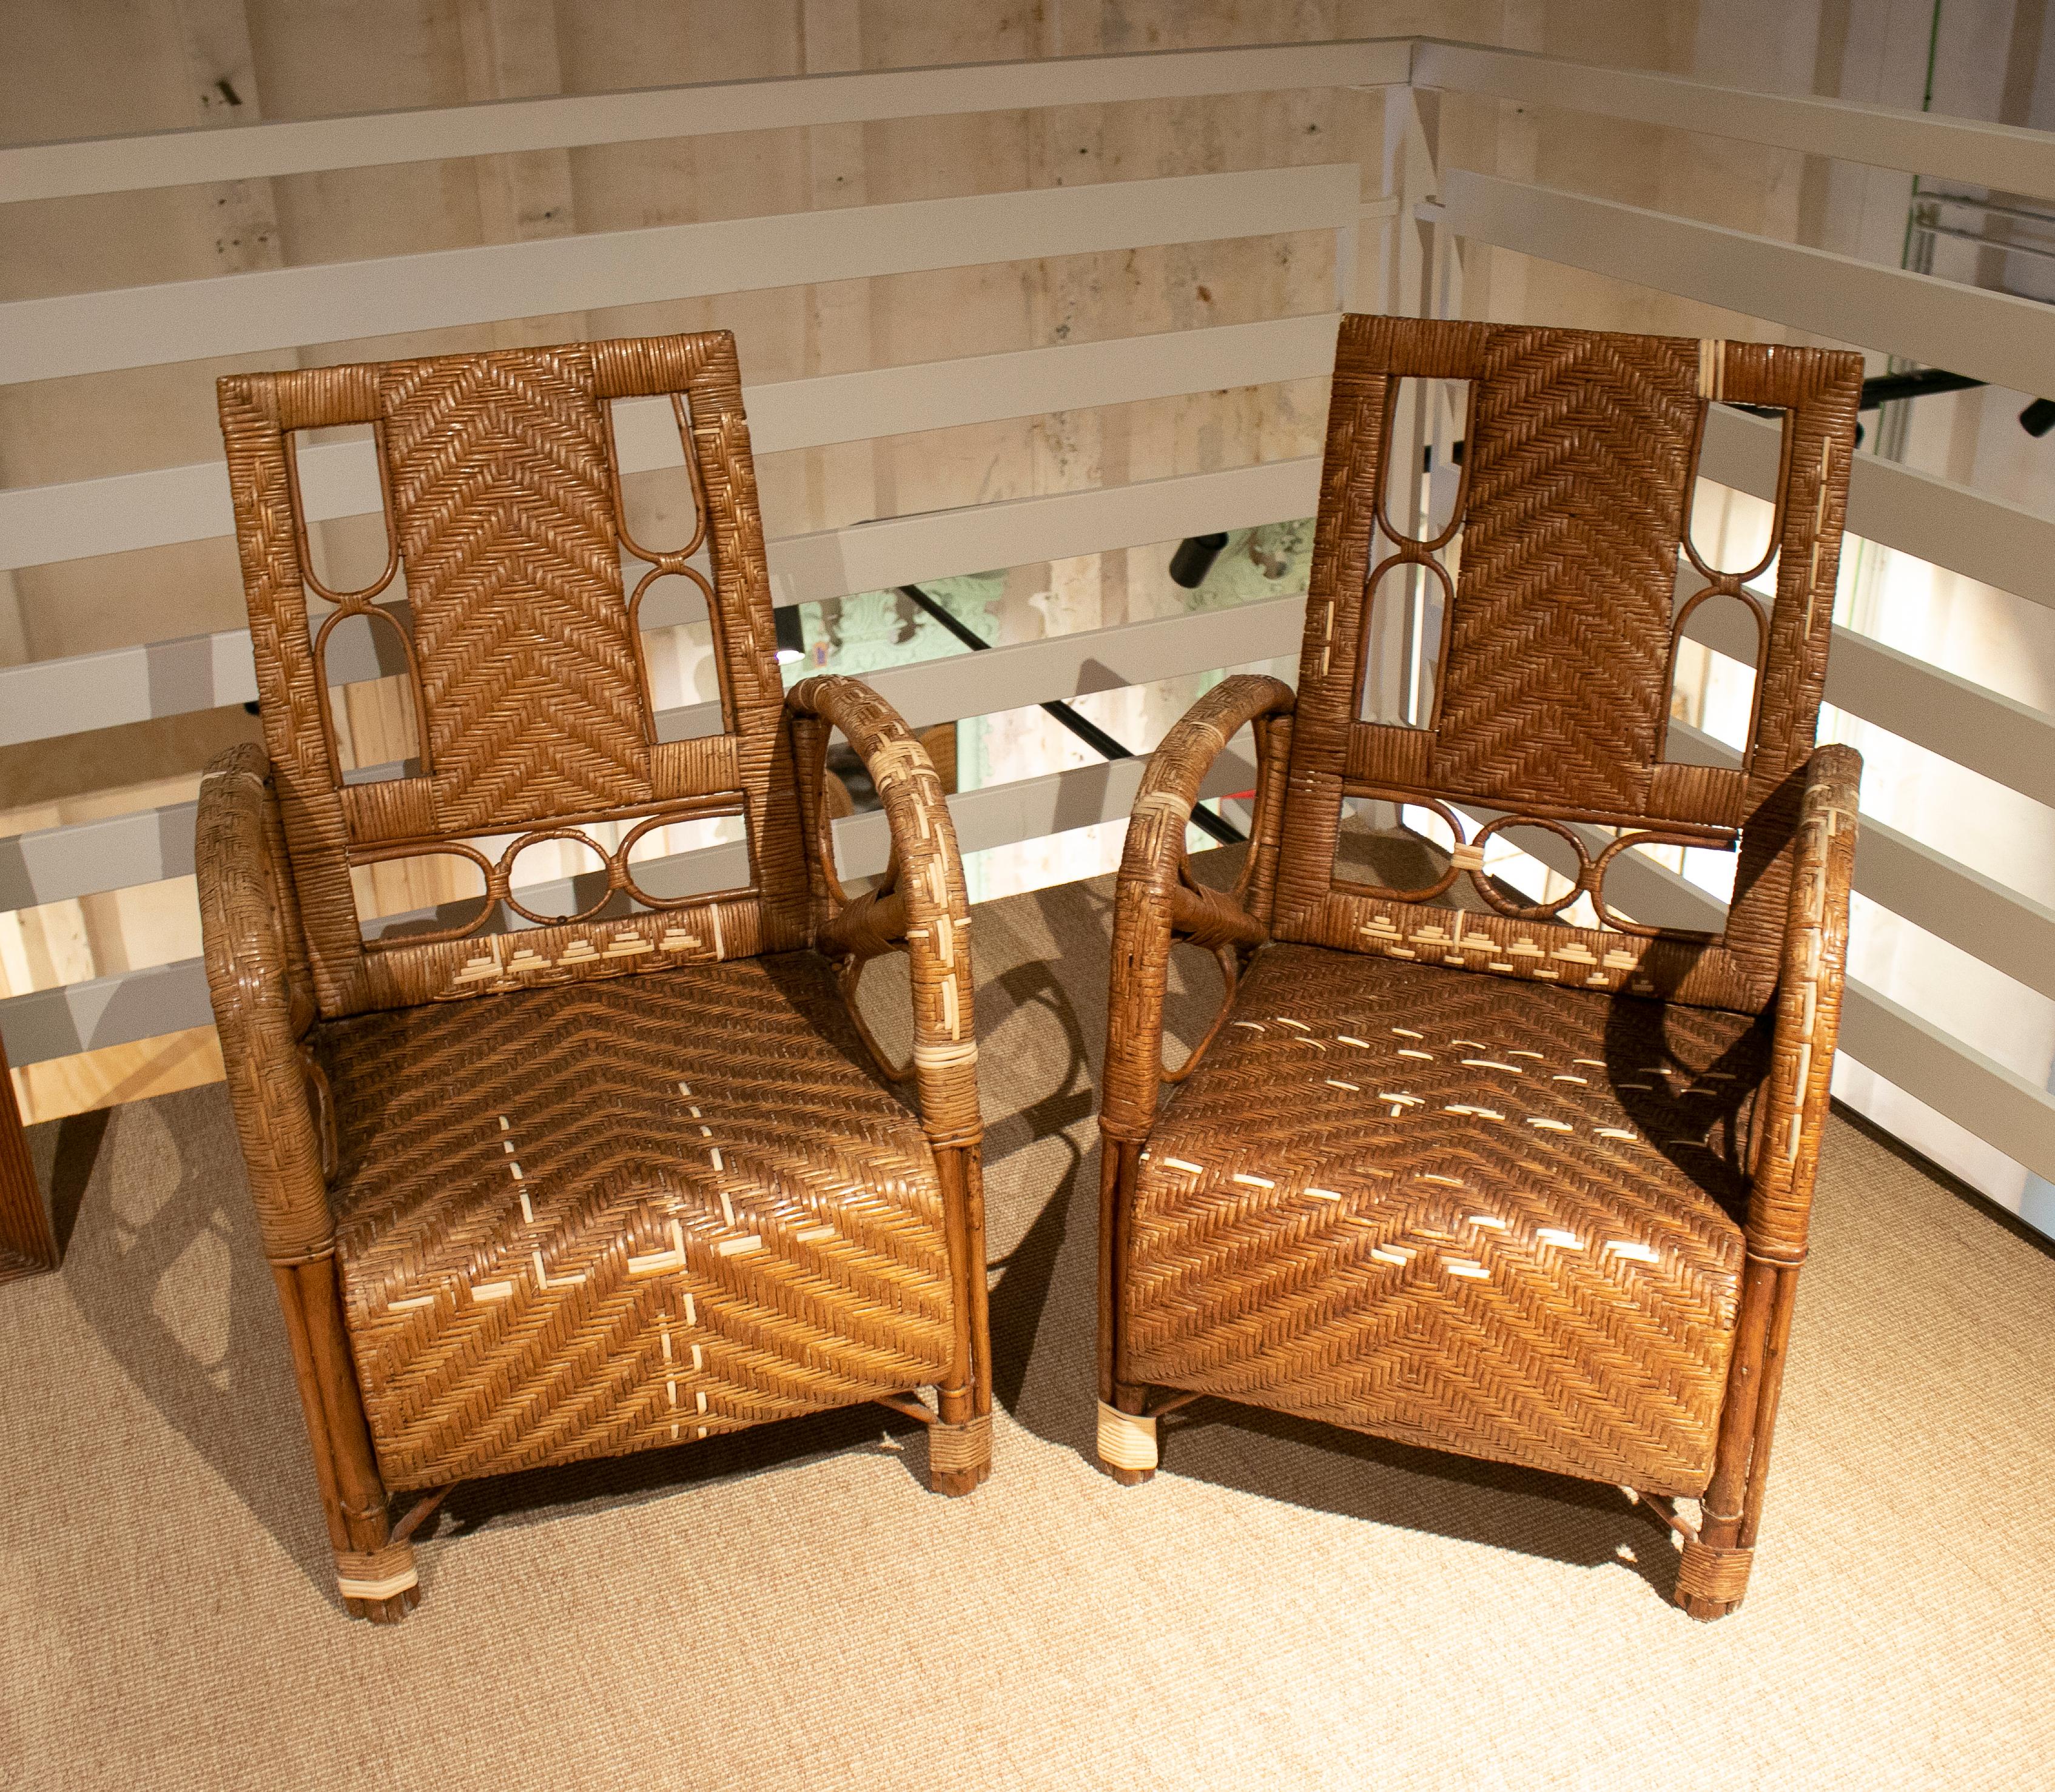 Vintage 1950s pair of Spanish hand woven wicker armchairs.